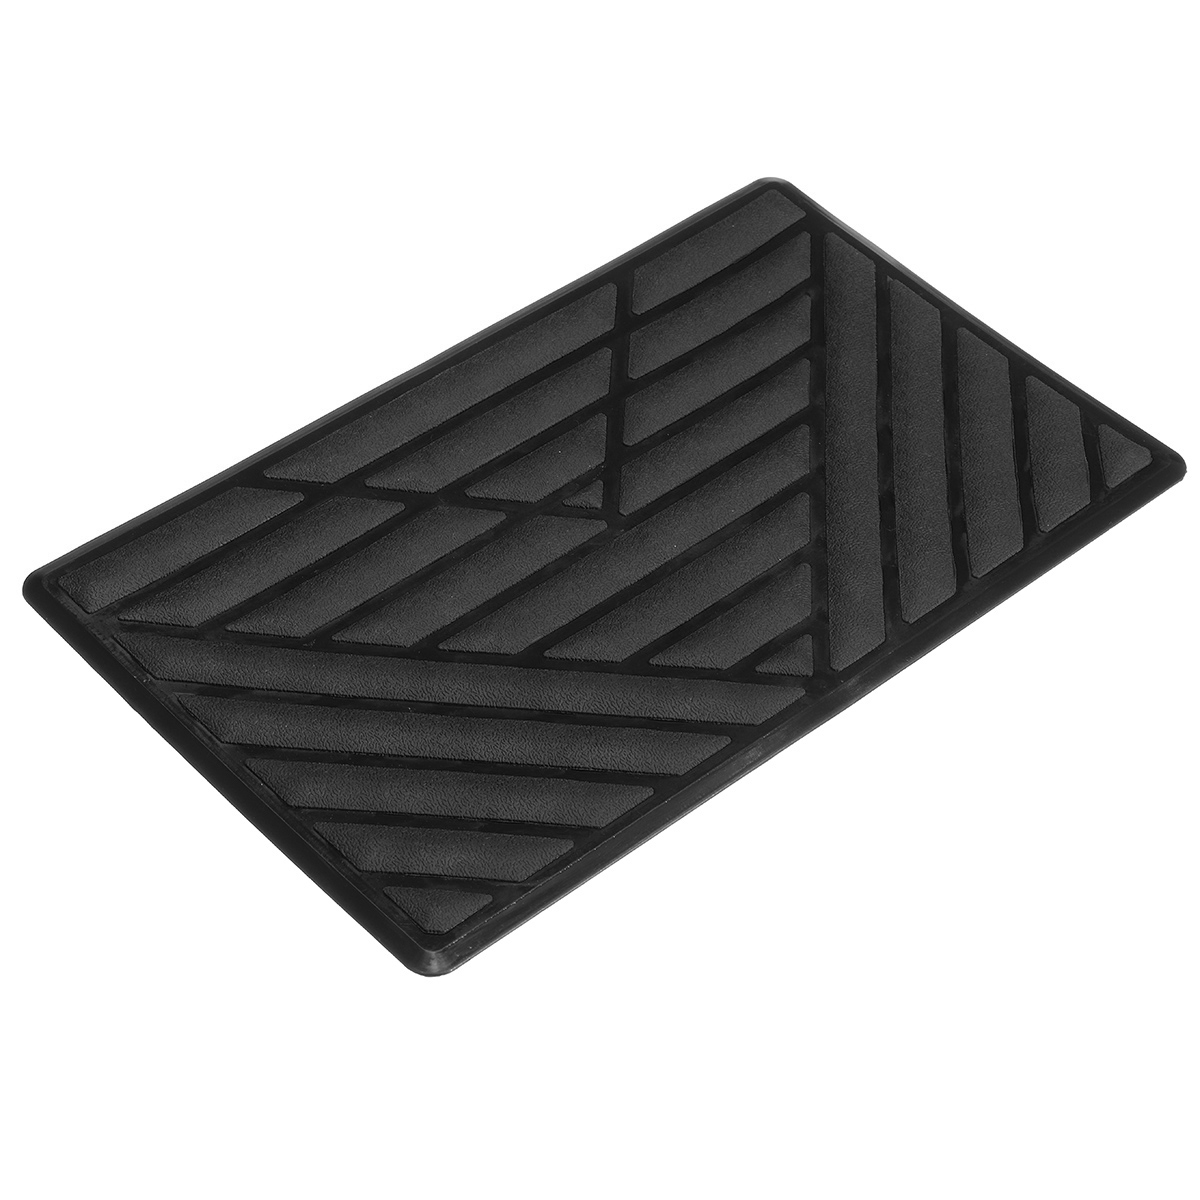 25X15Cm Heel Pad Foot Rest Pedal Plate Floor Mat Carpet Hole Cover Style